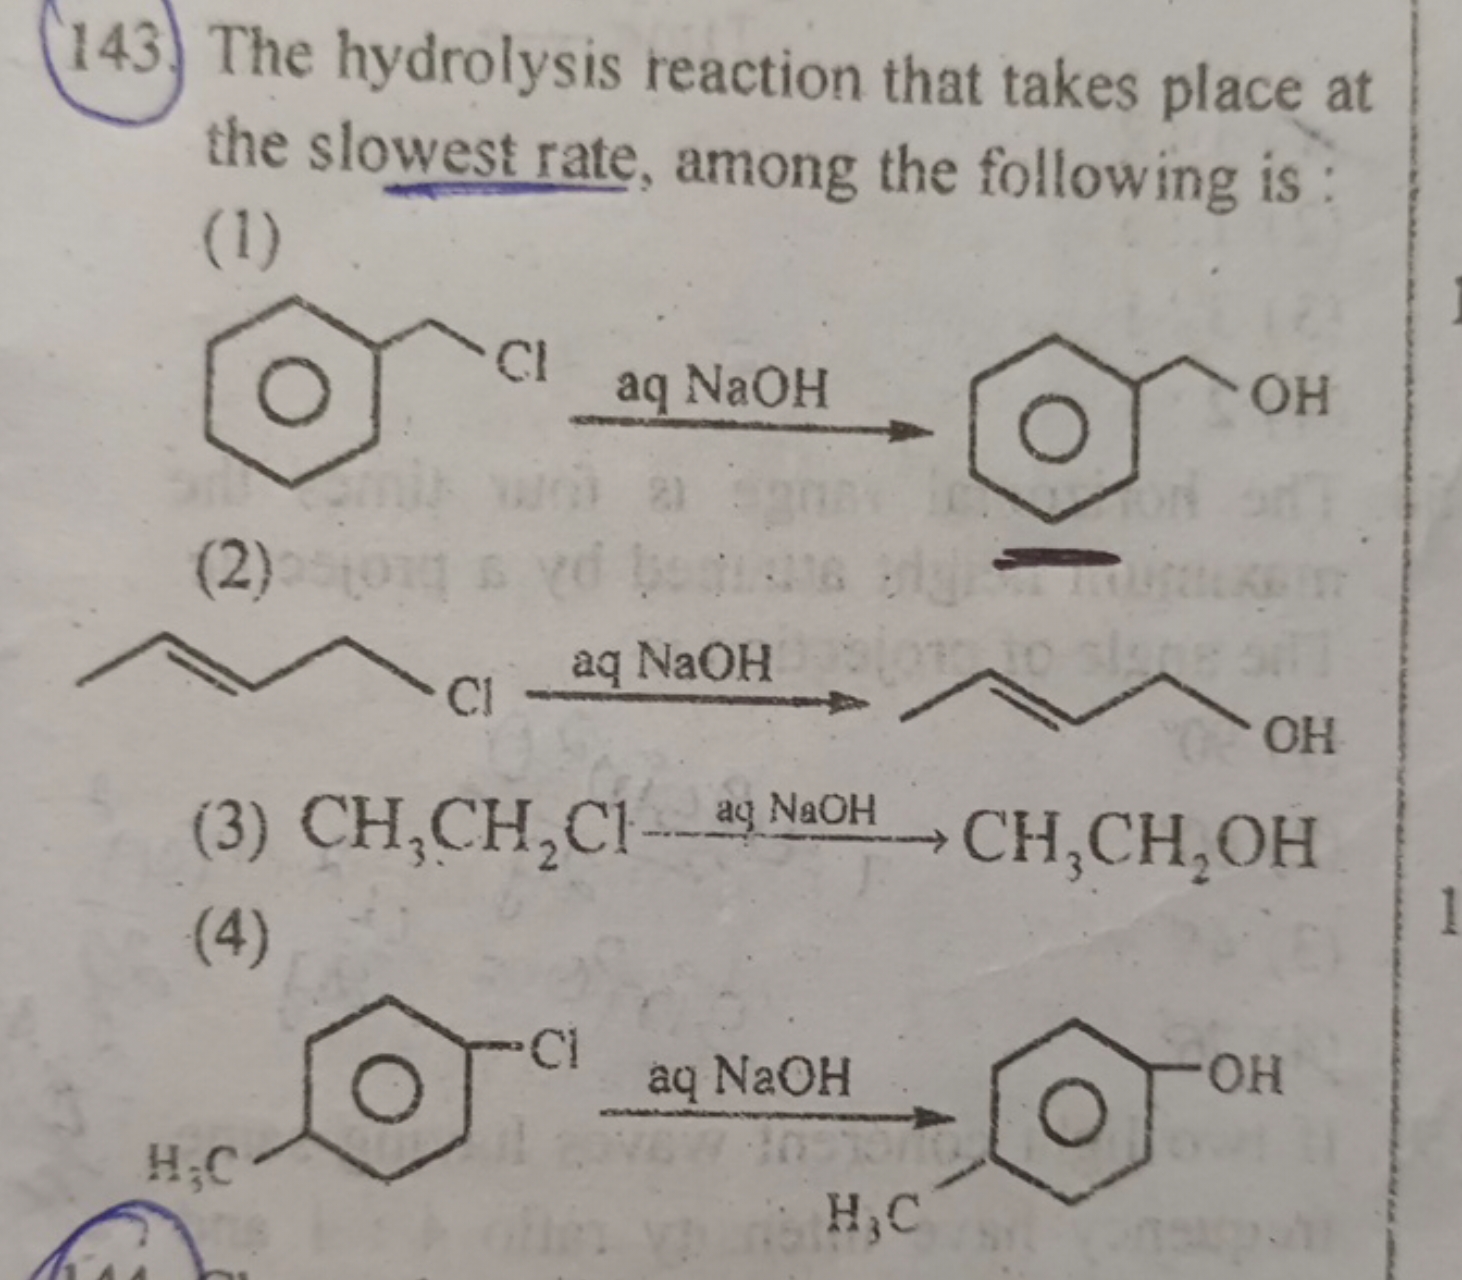 (143.) The hydrolysis reaction that takes place at the slowest rate, a